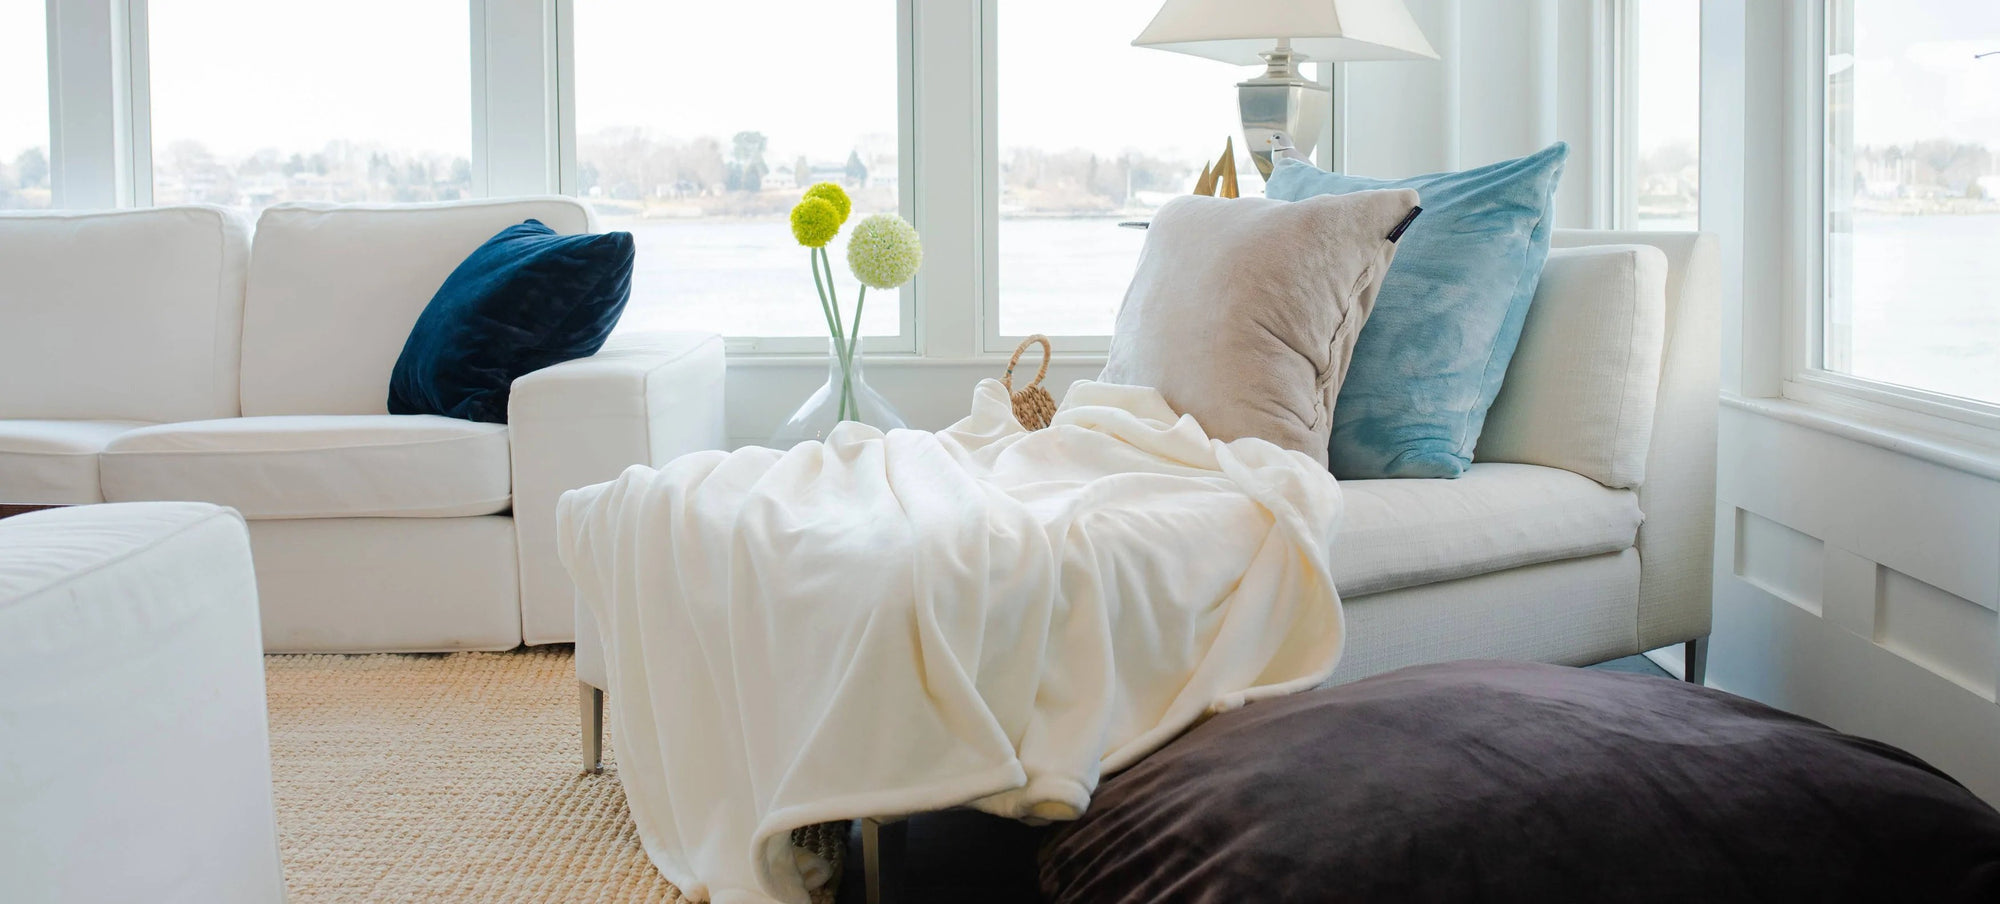 Best Throw Pillows - Luster Loft by American Blanket Company